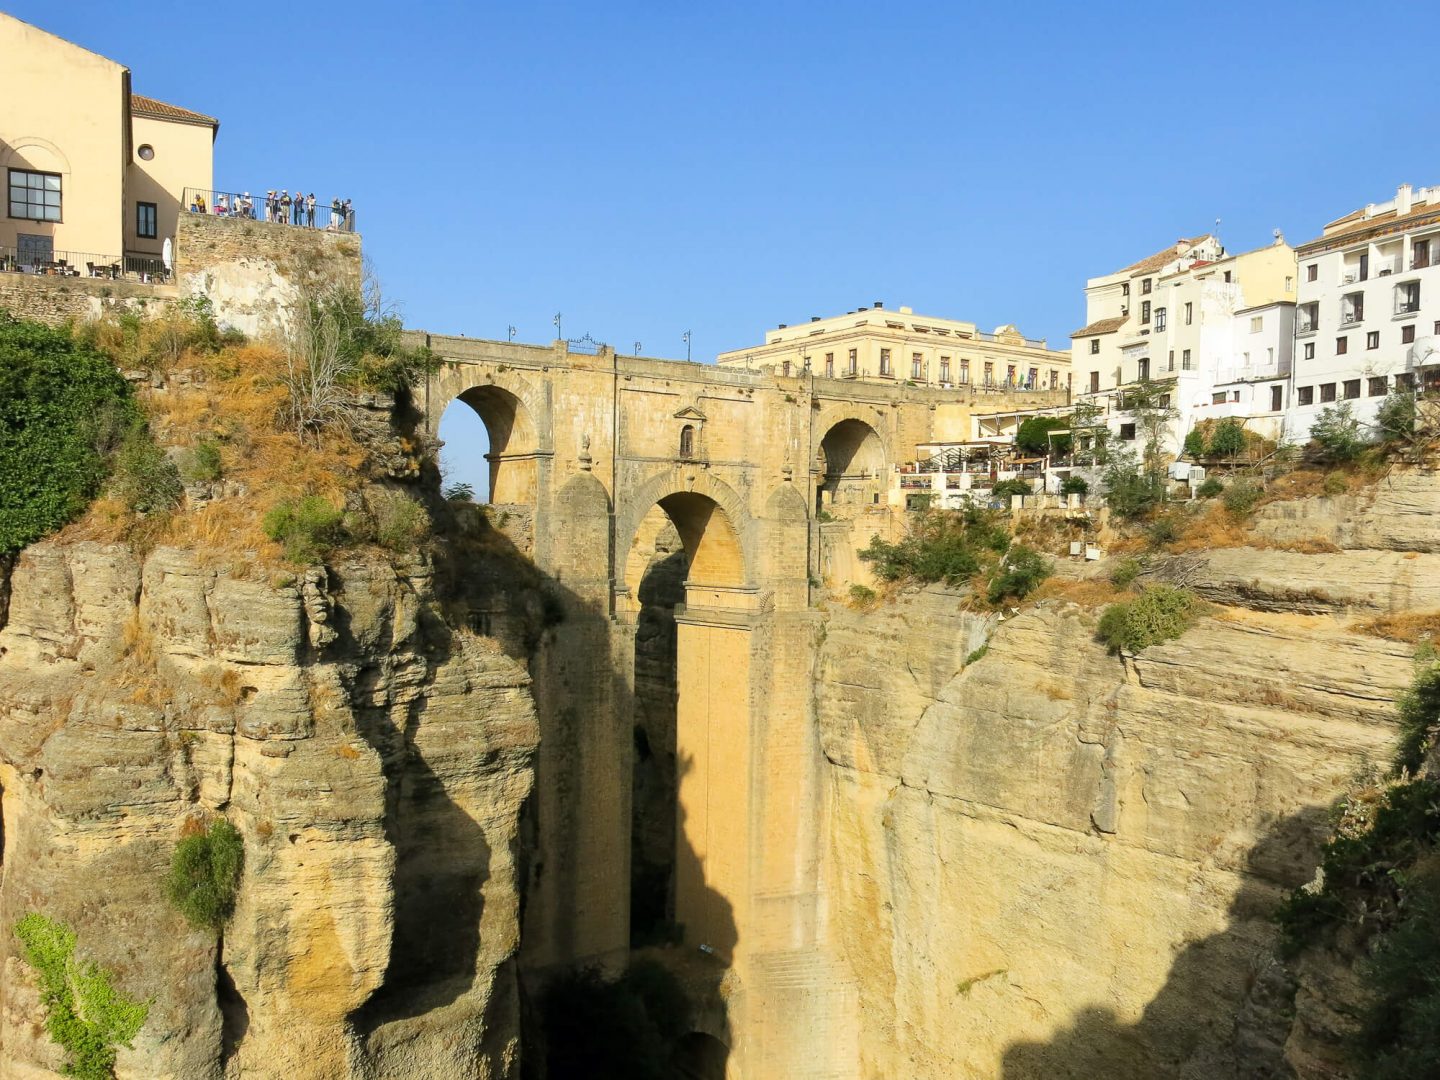 The Spanish town of Ronda. A great day trip from Kempinski Hotel Bahía, Spain